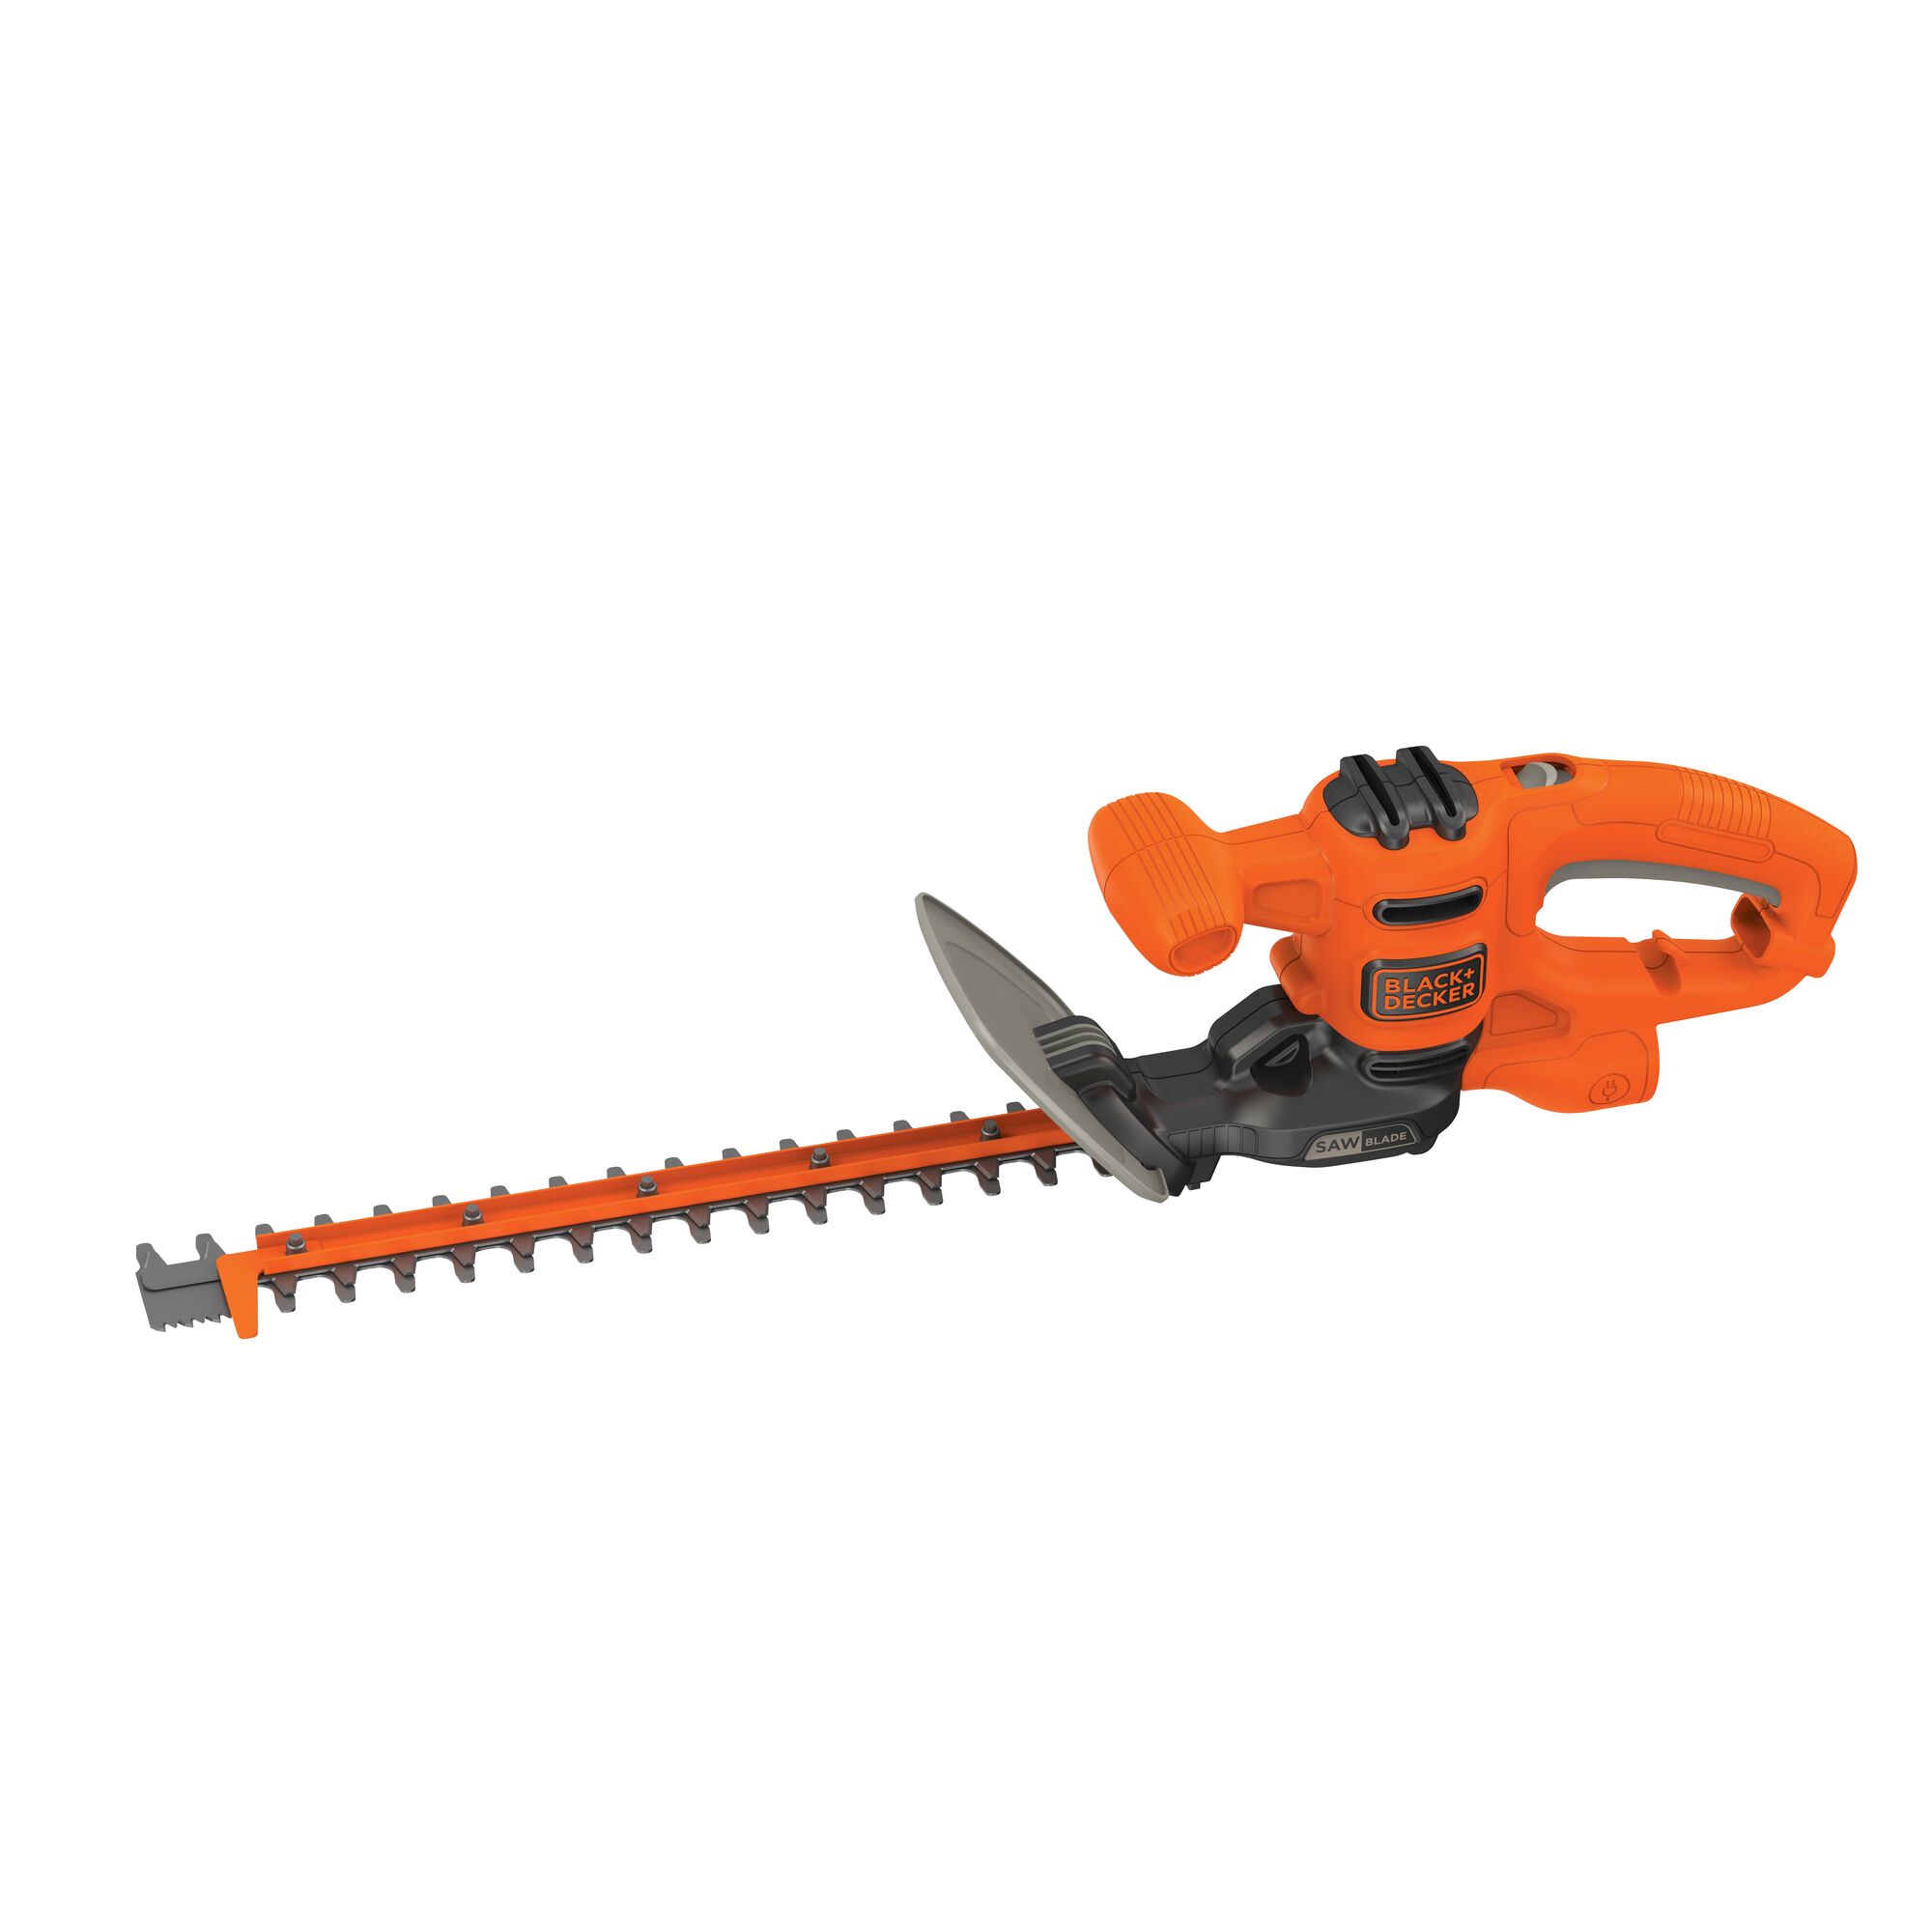 16 inch SAWBLADE electric hedge trimmer